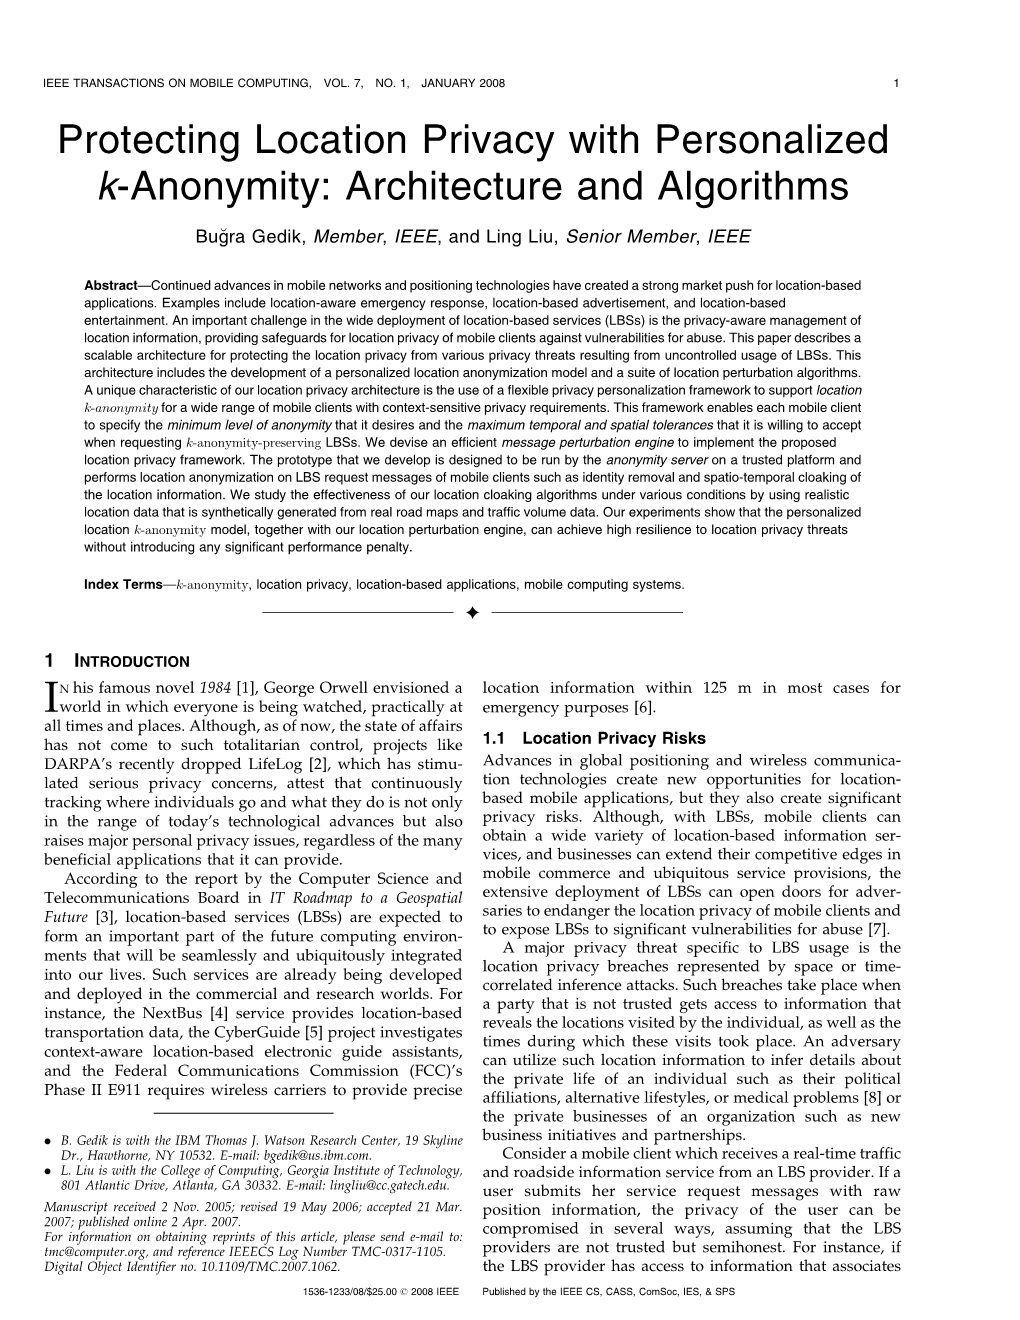 Protecting Location Privacy with Personalized K-Anonymity: Architecture and Algorithms